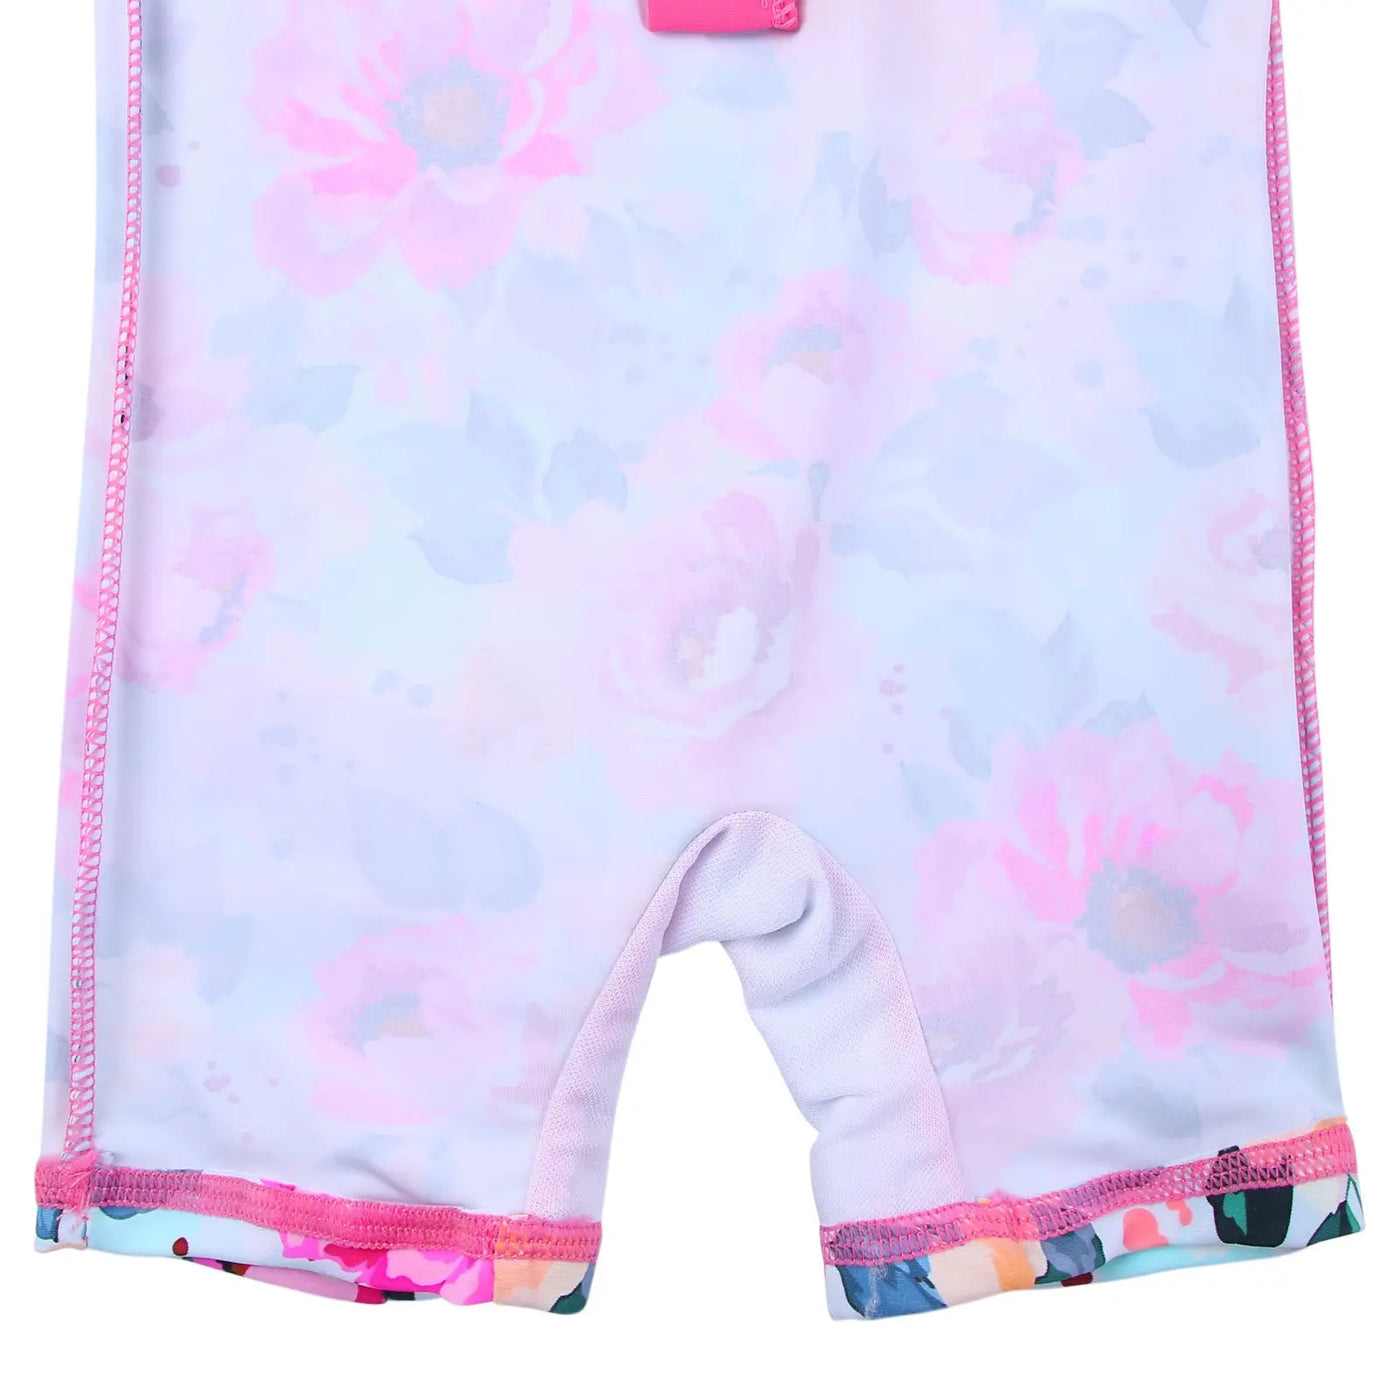 ​Baby's Floral Long Sleeve Swimsuit | Kids Swimming Suit - SwimcoreBaby's Floral Long Sleeve Swimsuit